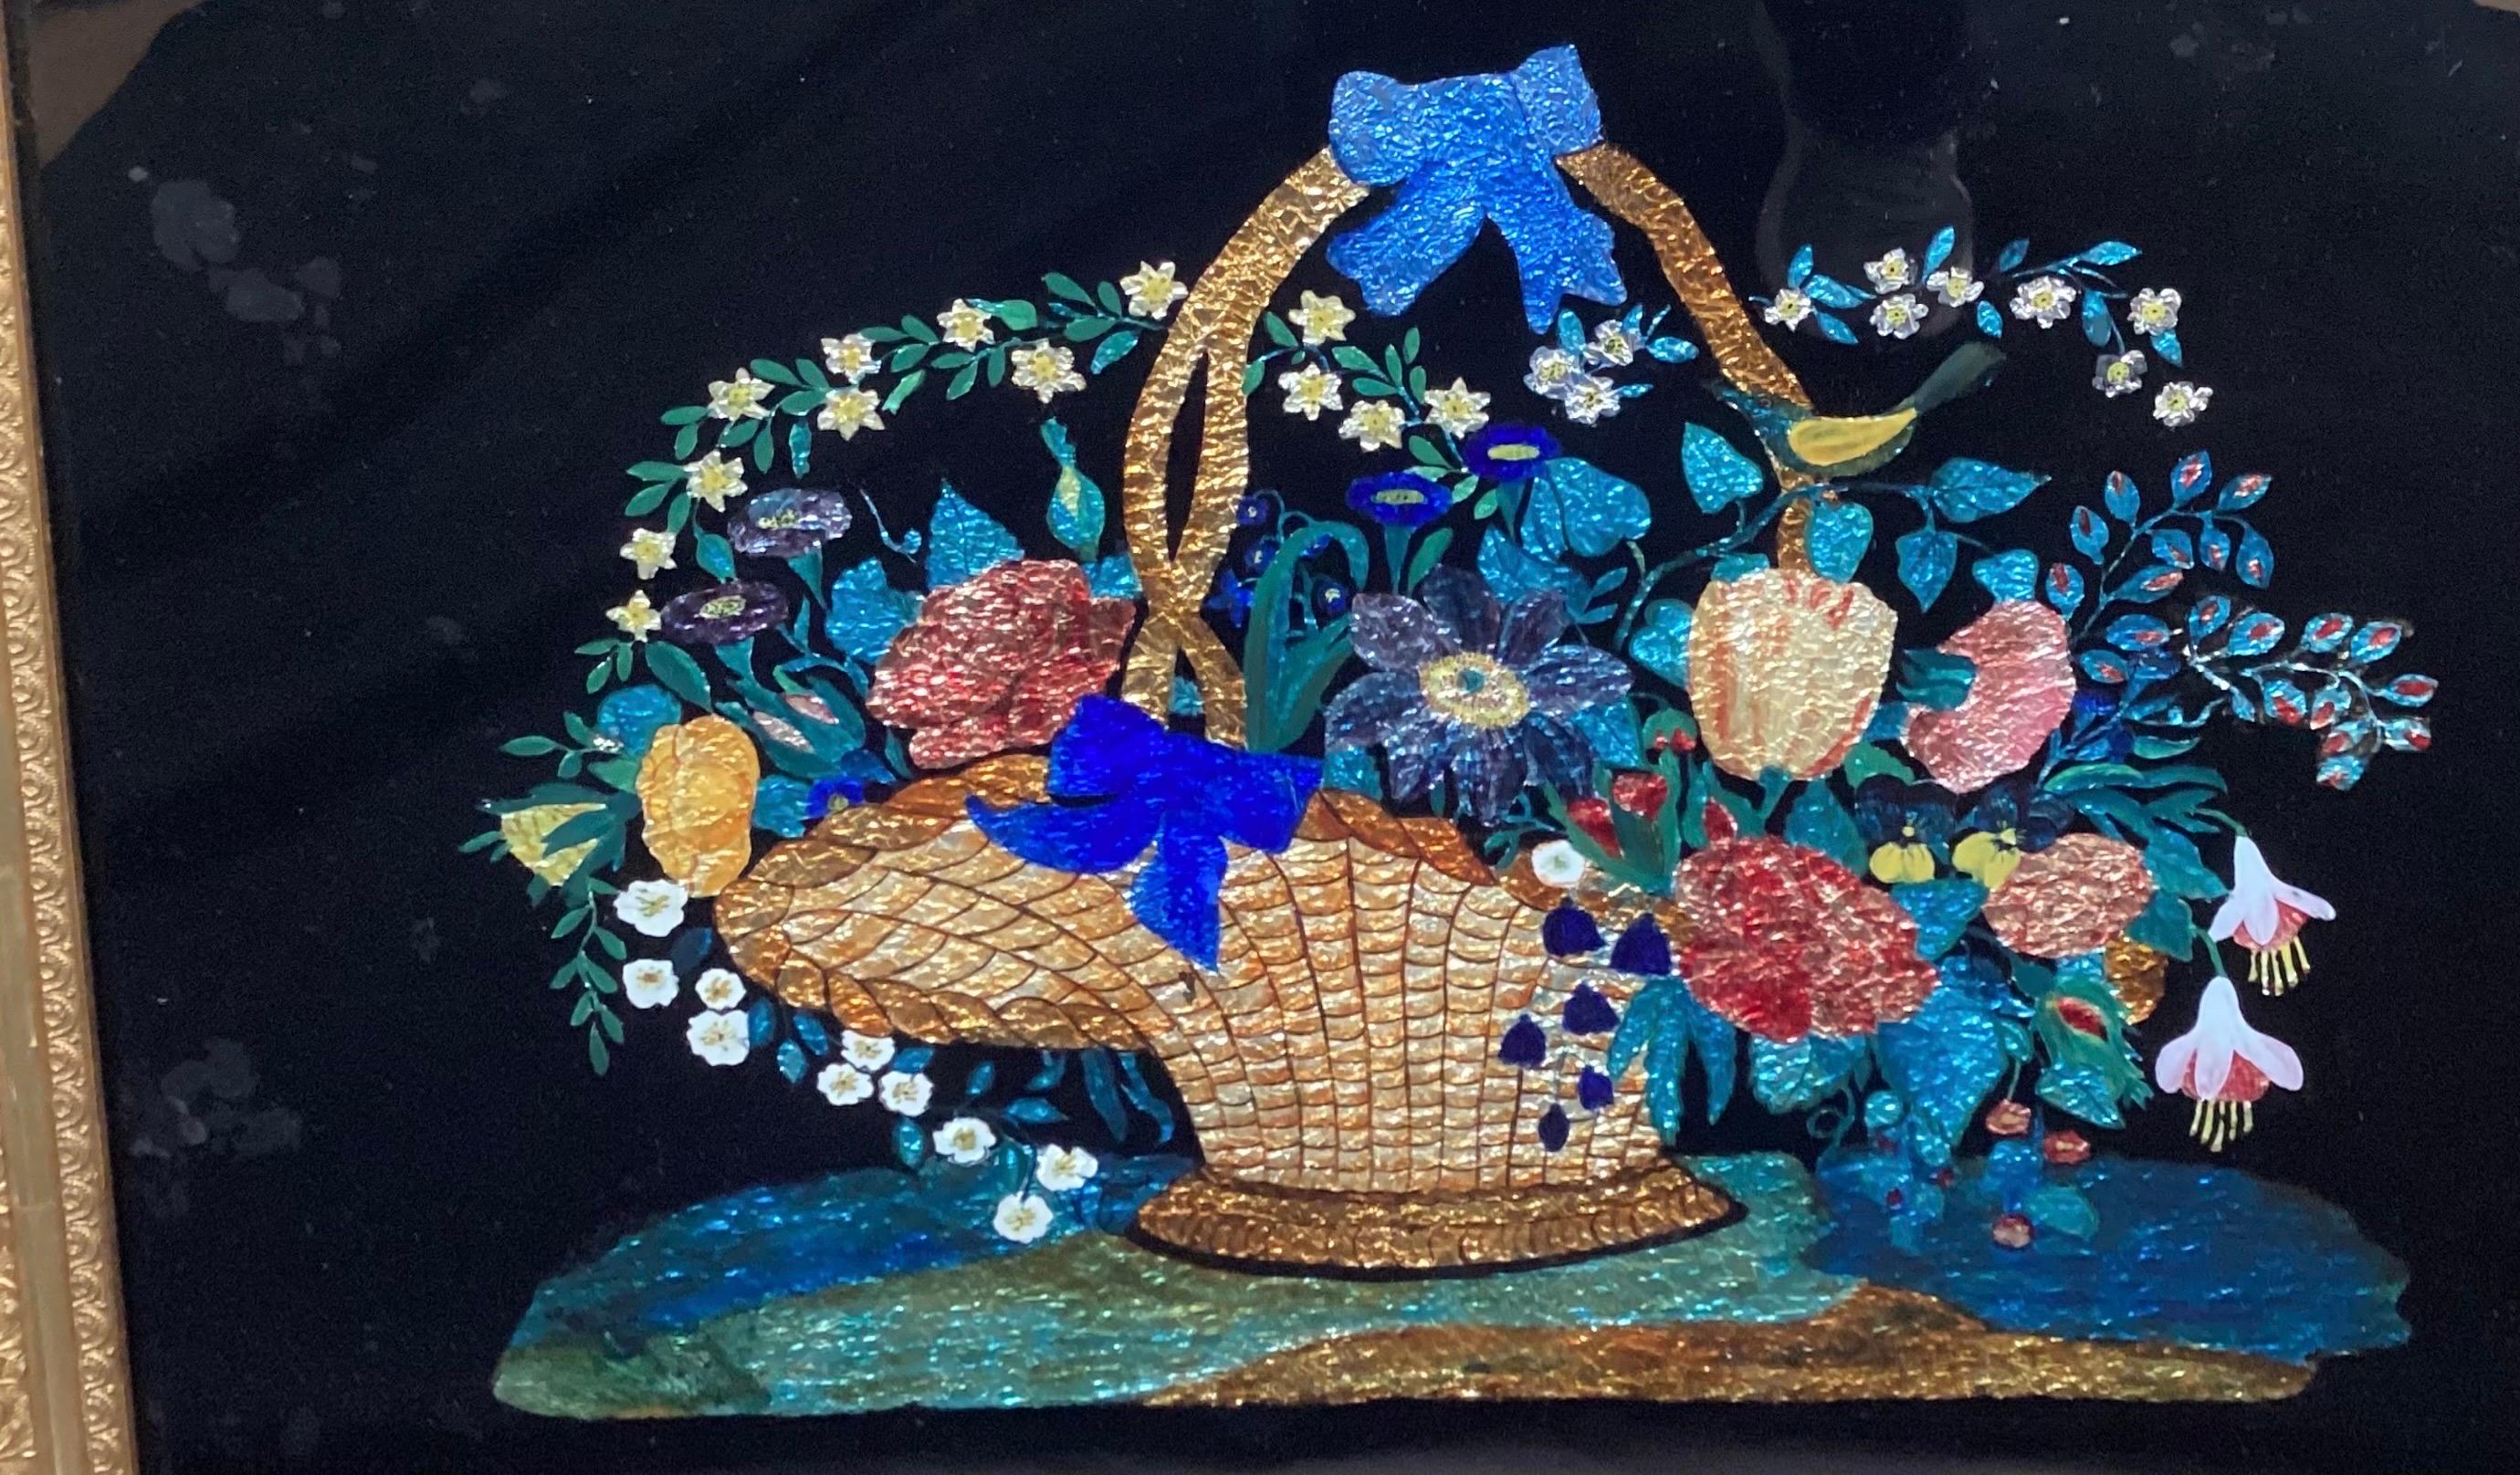 A charming reverse painting on glass of a floral filled basked.  The black background with vibrant color floral and foil behind glass, in original gilt frame.  